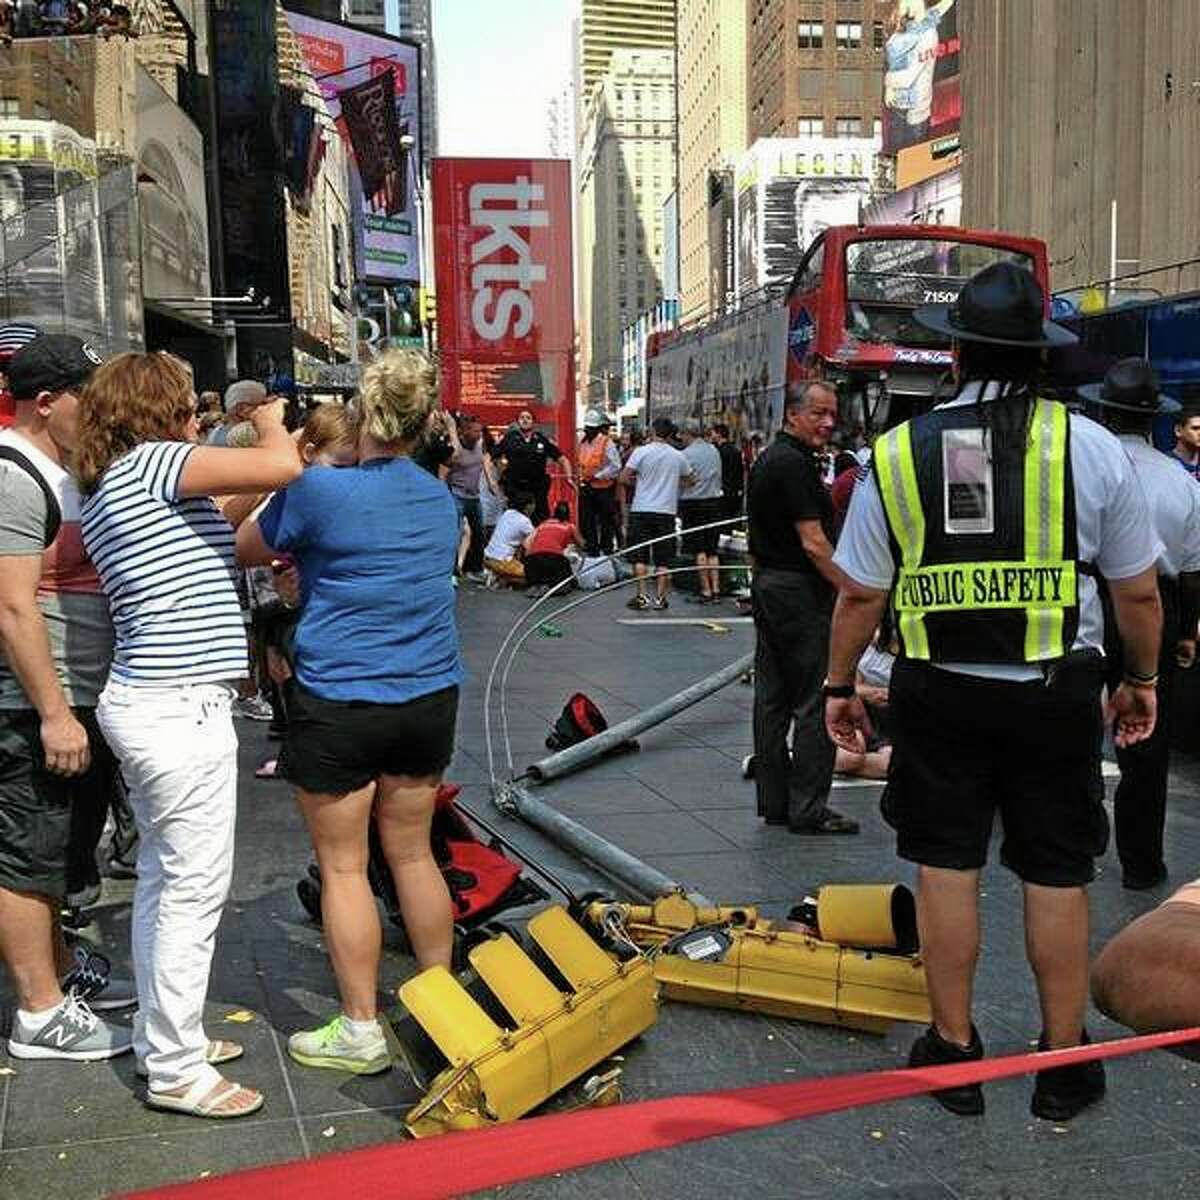 In this photo provided by Josh Price, pedestrians gather at the scene of a bus crash as first responders attend to the victims, Tuesday, Aug. 5, 2014, in New York Cityís Times Square. The Theater District collision of two double-decker tour buses injured more than a dozen people. (AP Photo/Josh Price)